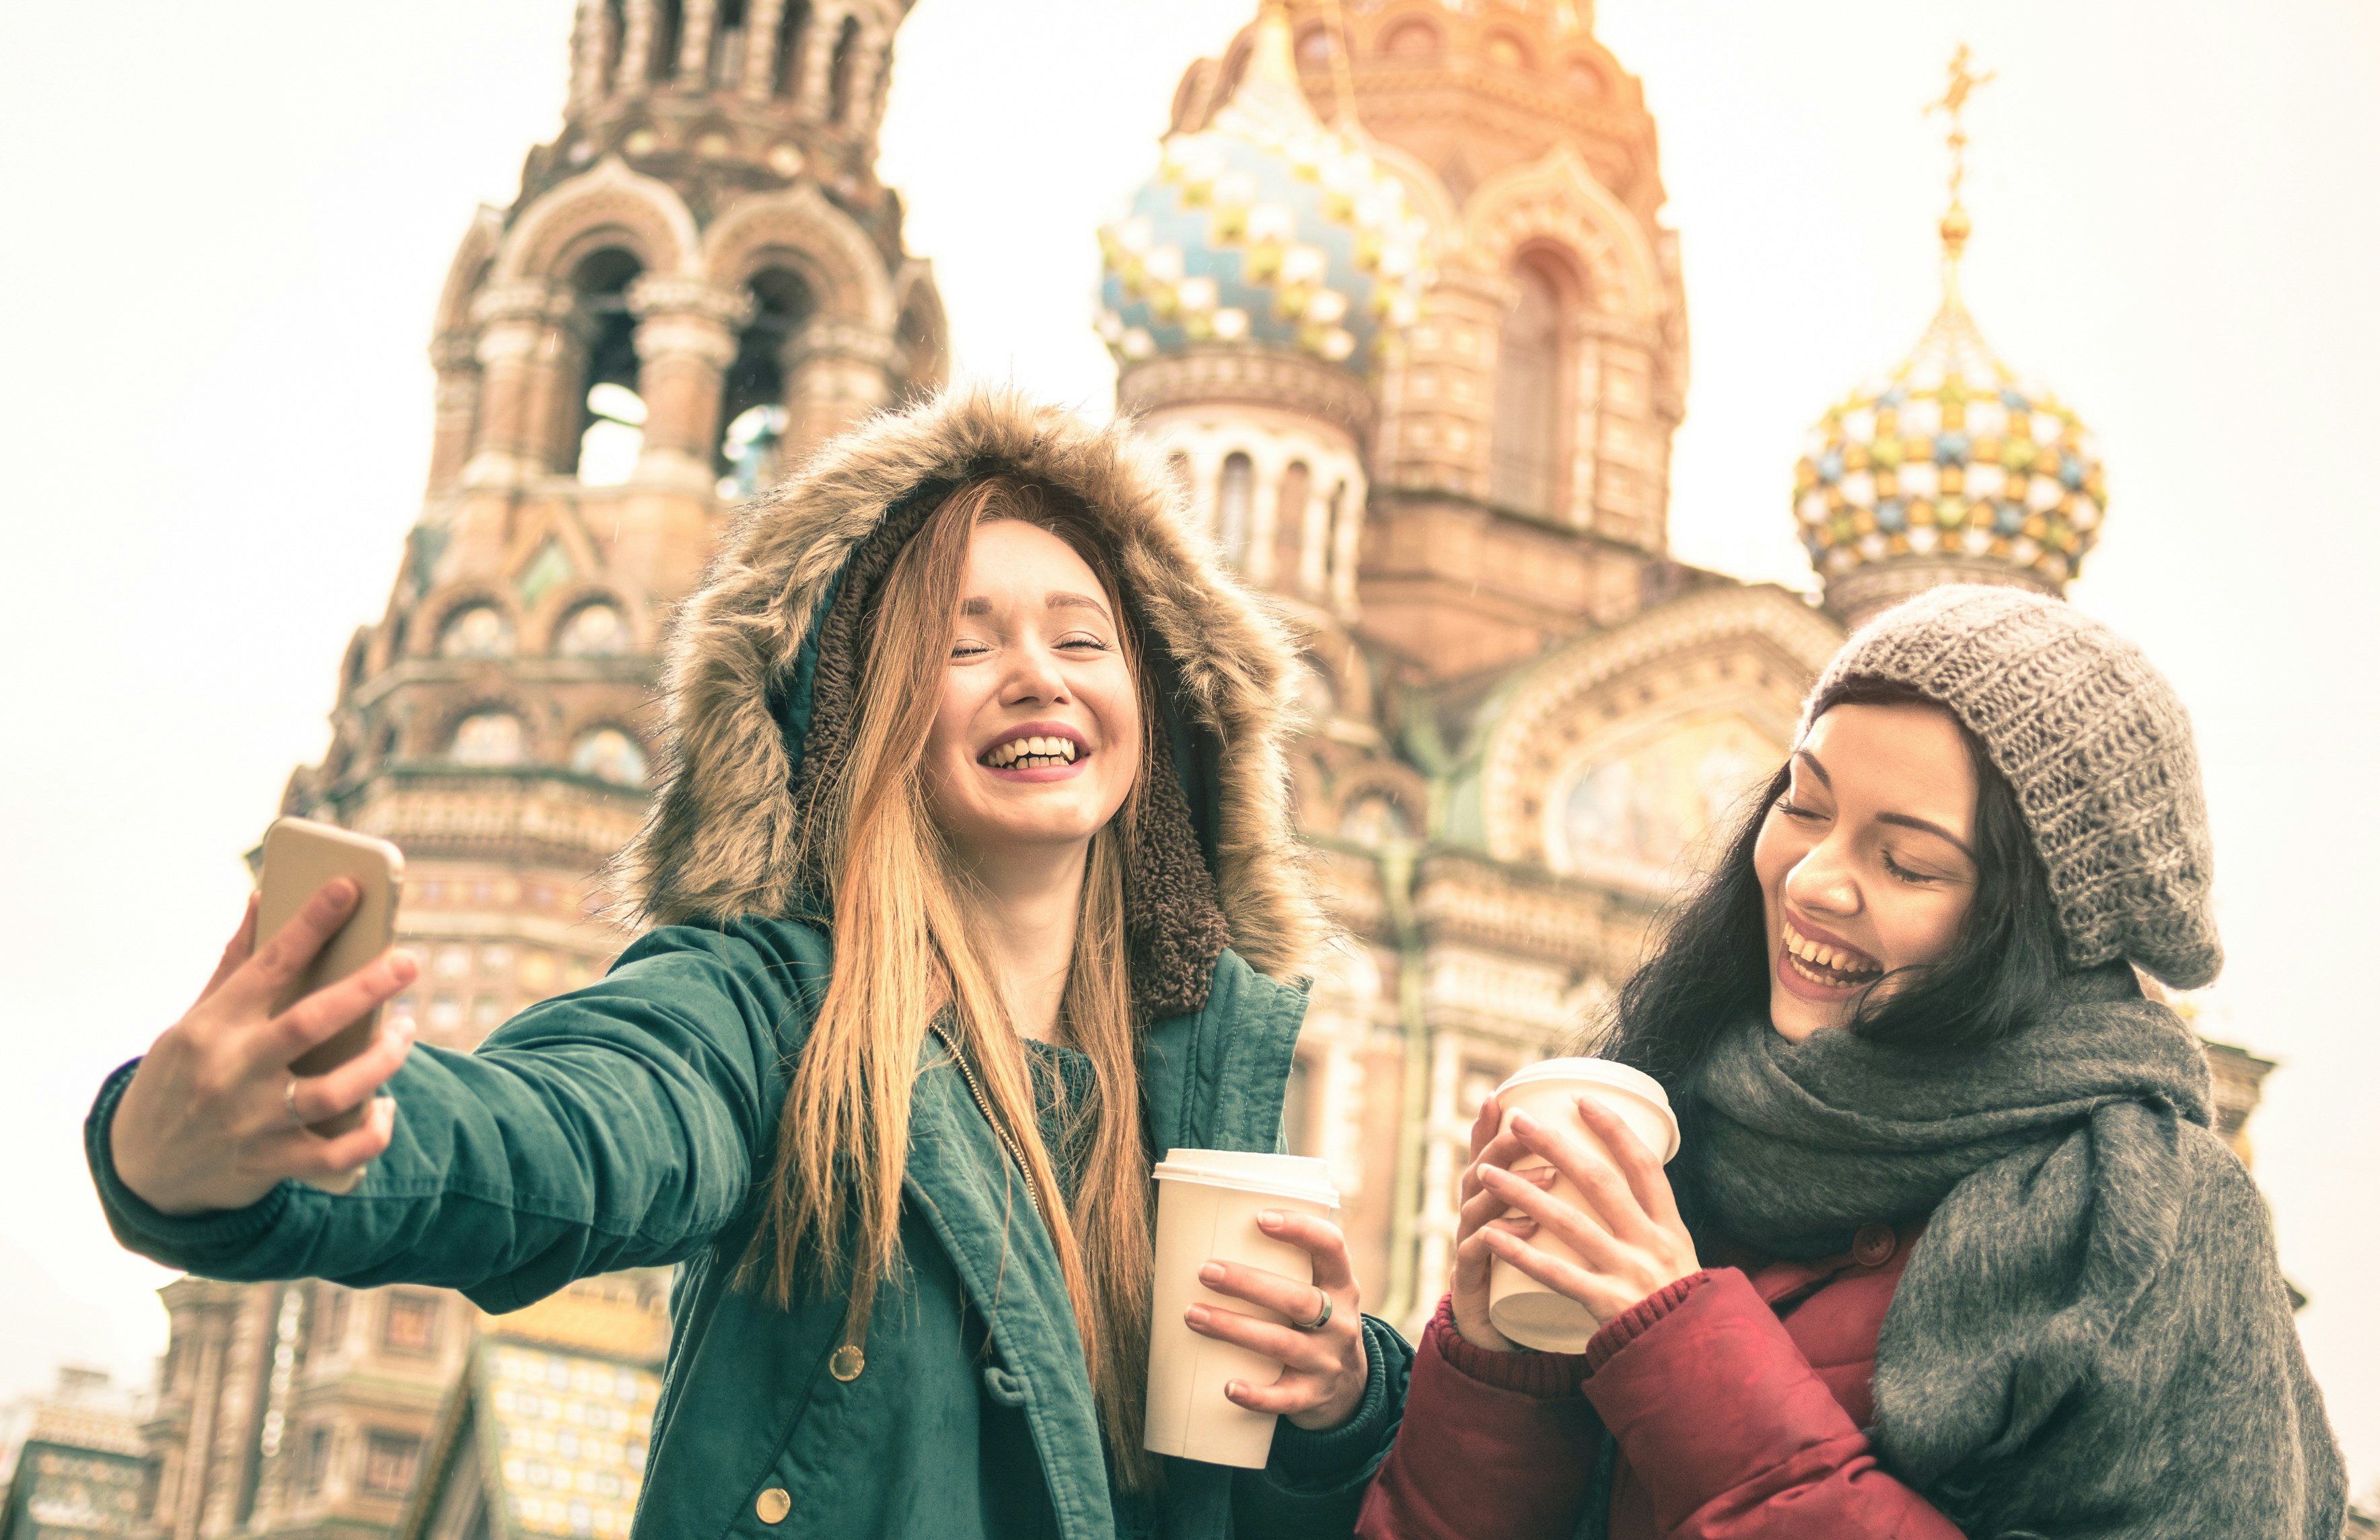 Two laughing girls take a winter selfie outside the Savior on Spilled Blood church in Saint Petersburg, Russia.